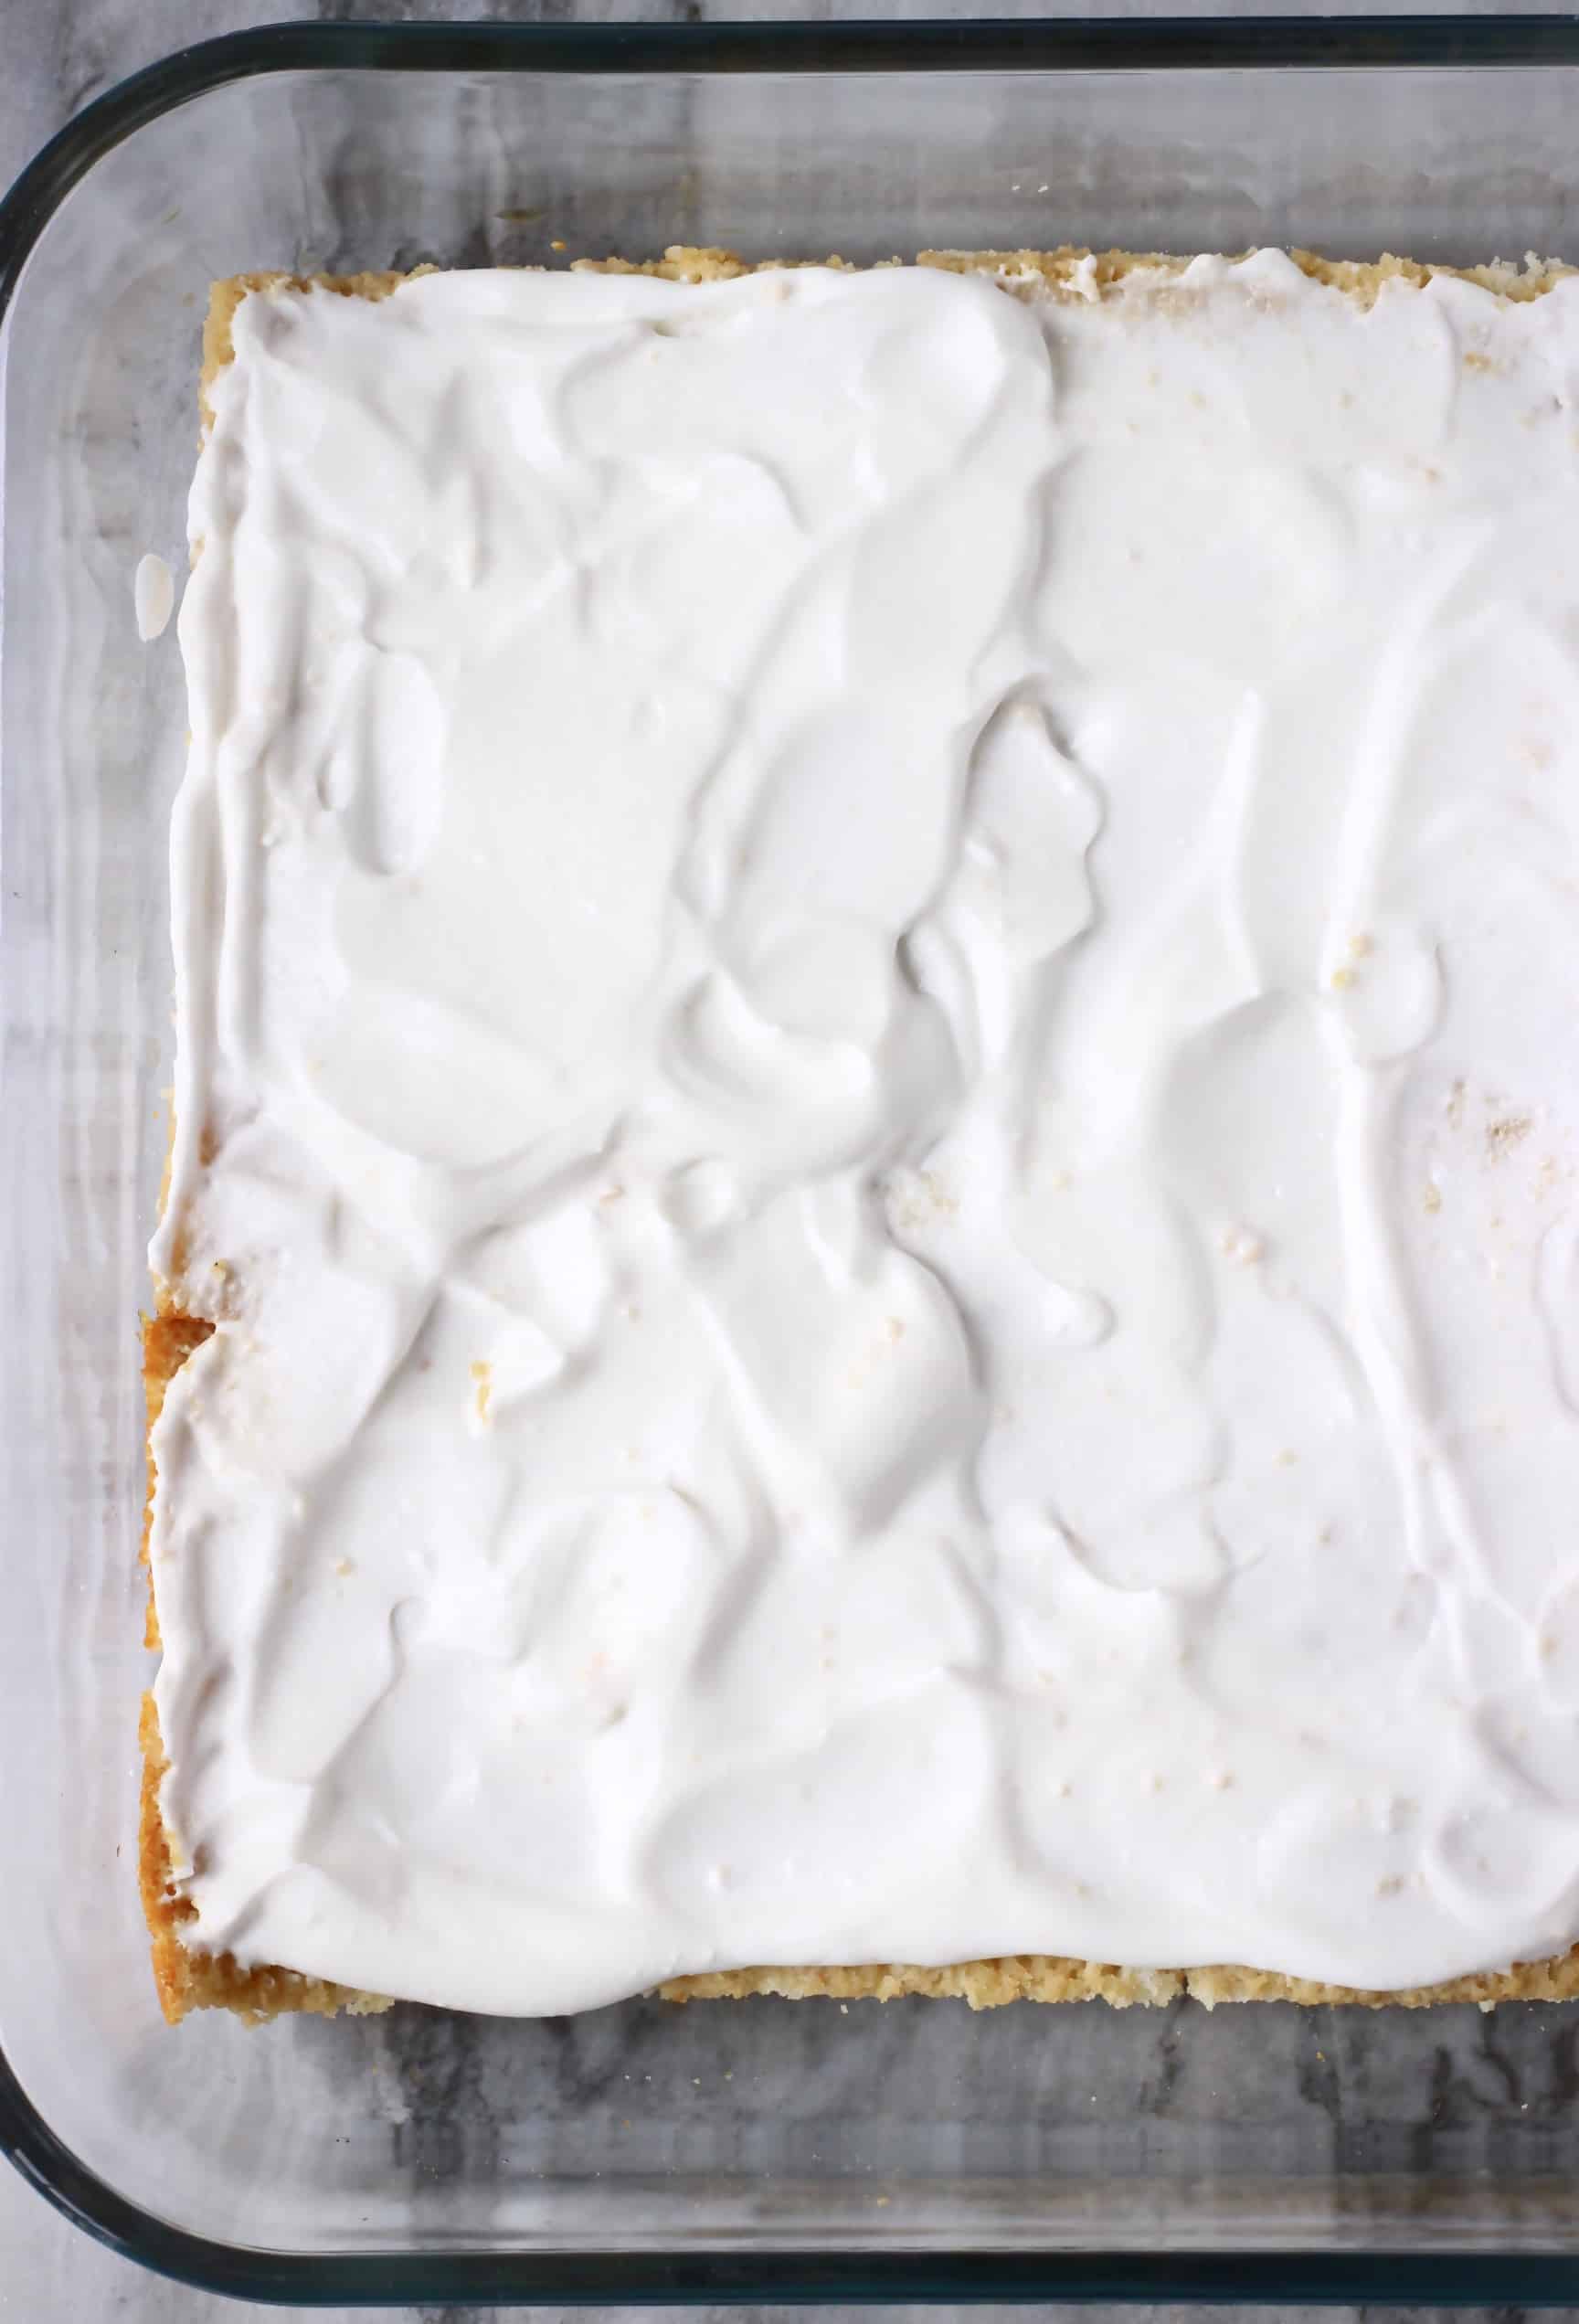 Photo of a large glass tray of tiramisu topped with white whipped cream taken from above